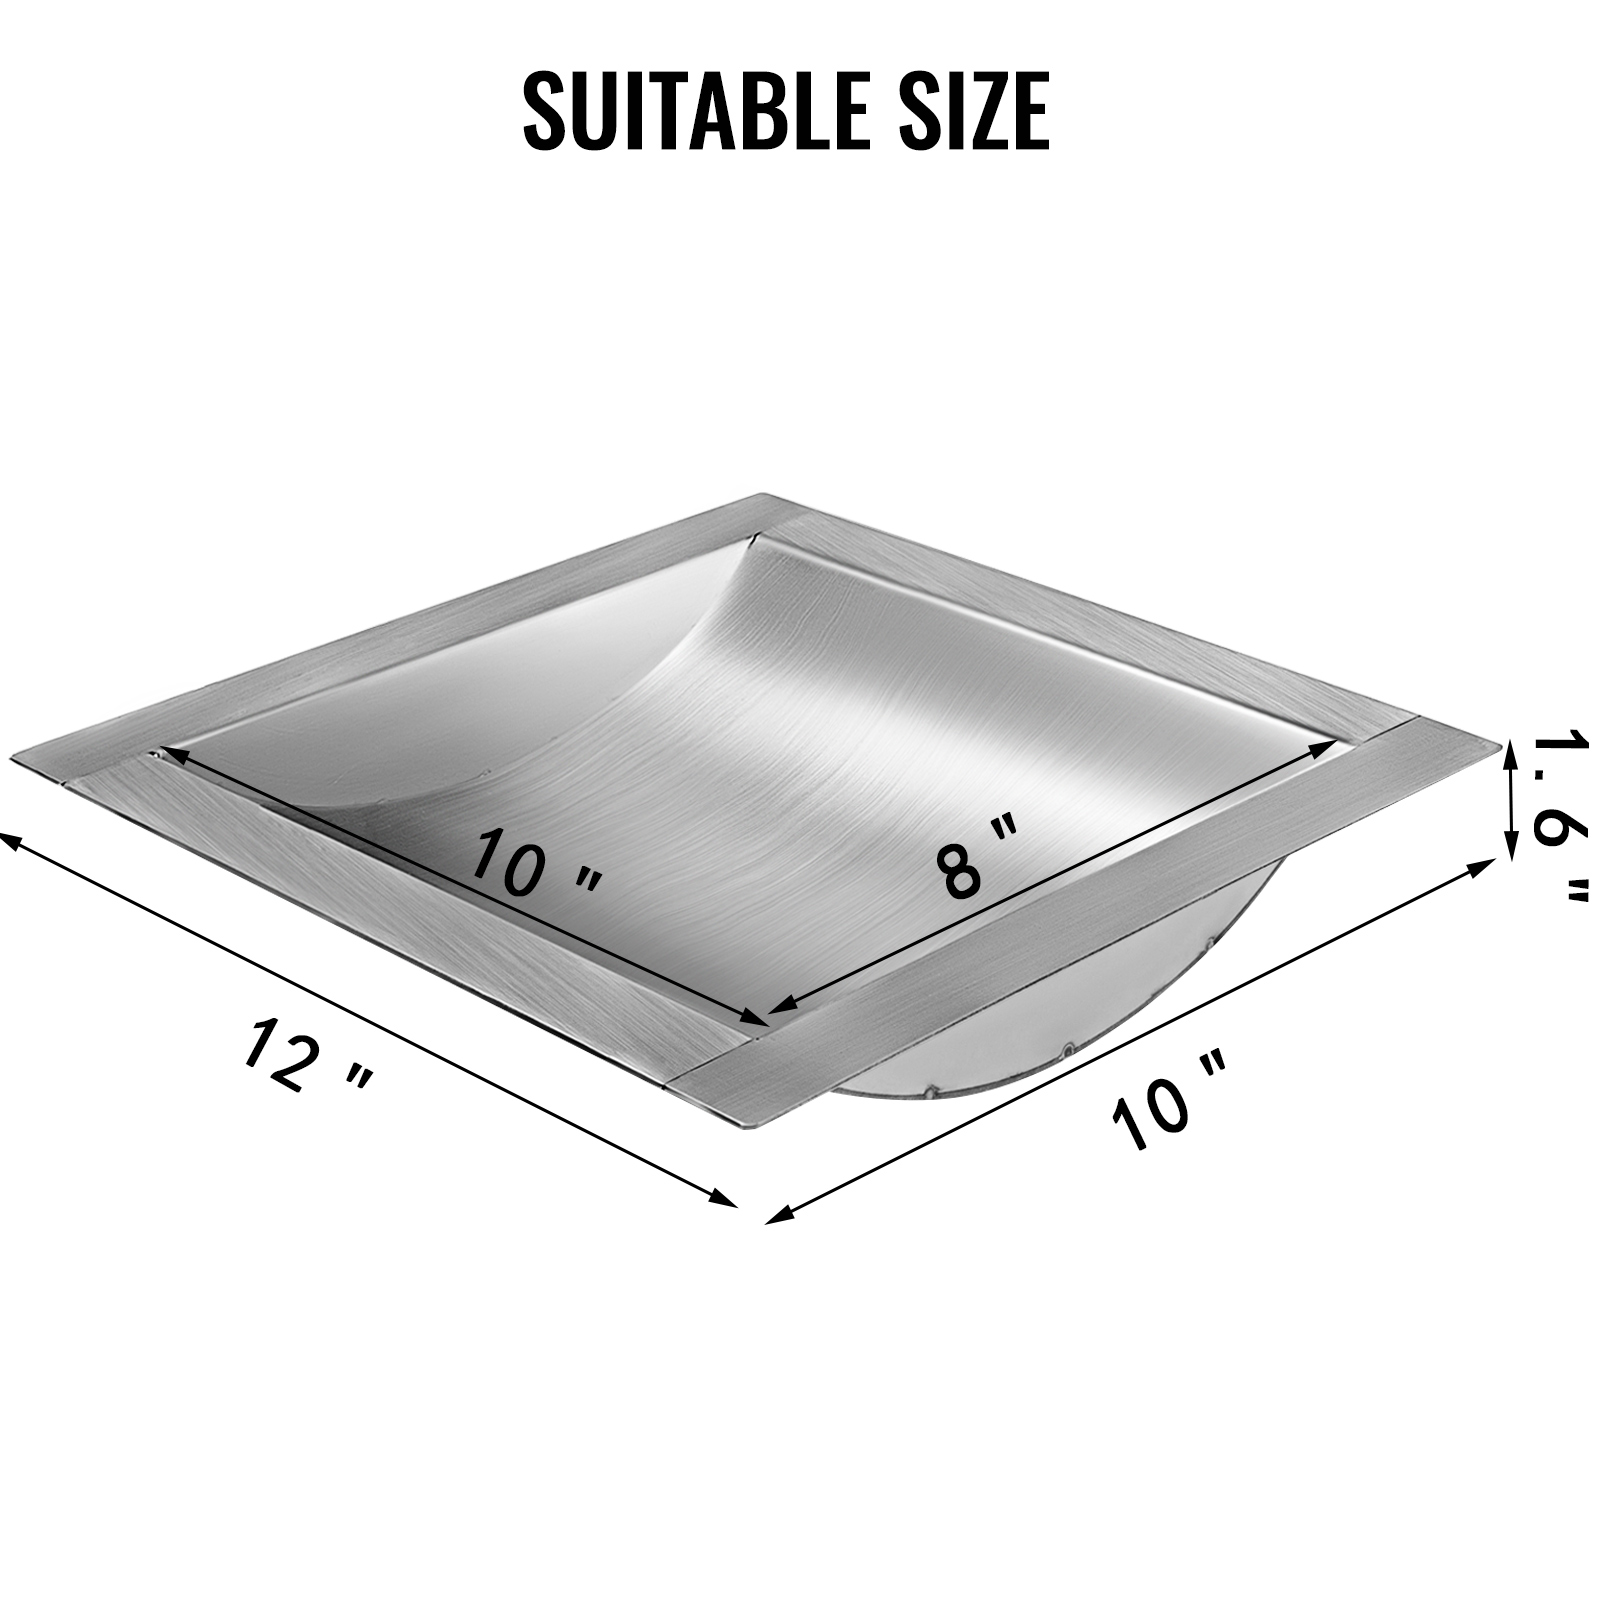 Stainless Steel Drop-In Deal Tray Brushed Finish d x 10" w 12" 